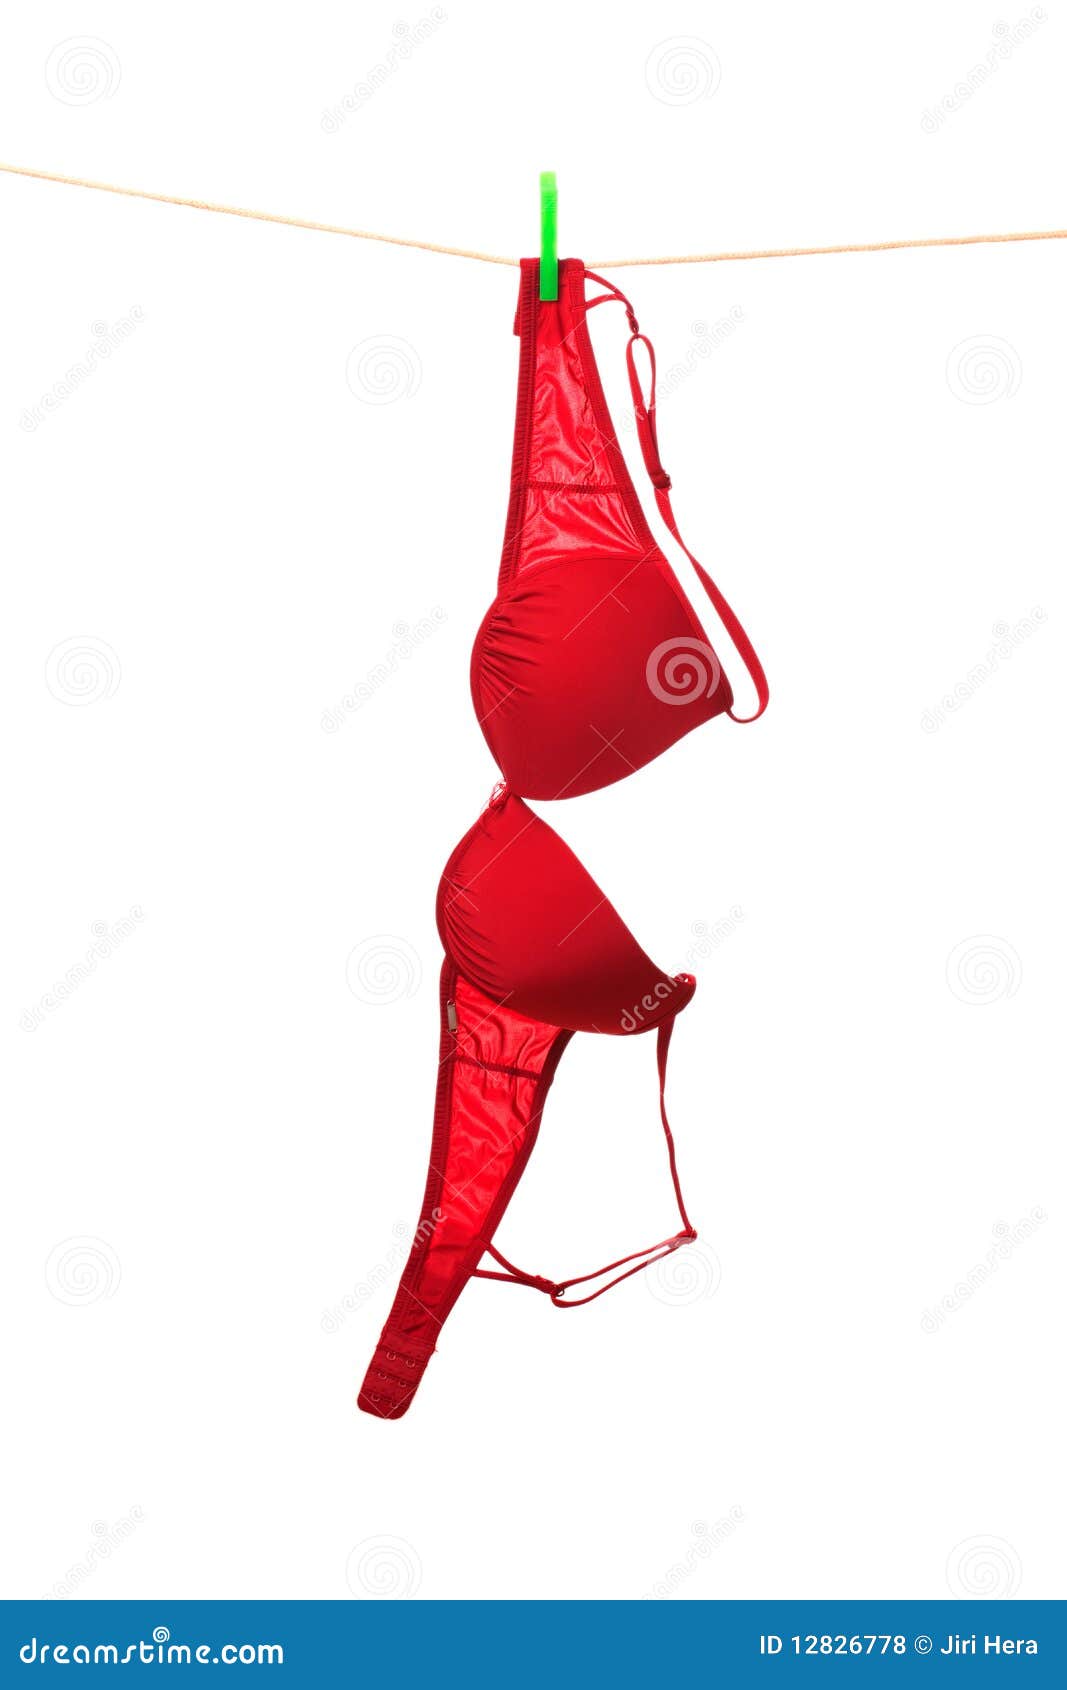 Bra Hanging on Clothes Line Stock Photo - Image of beautiful, body: 12826778